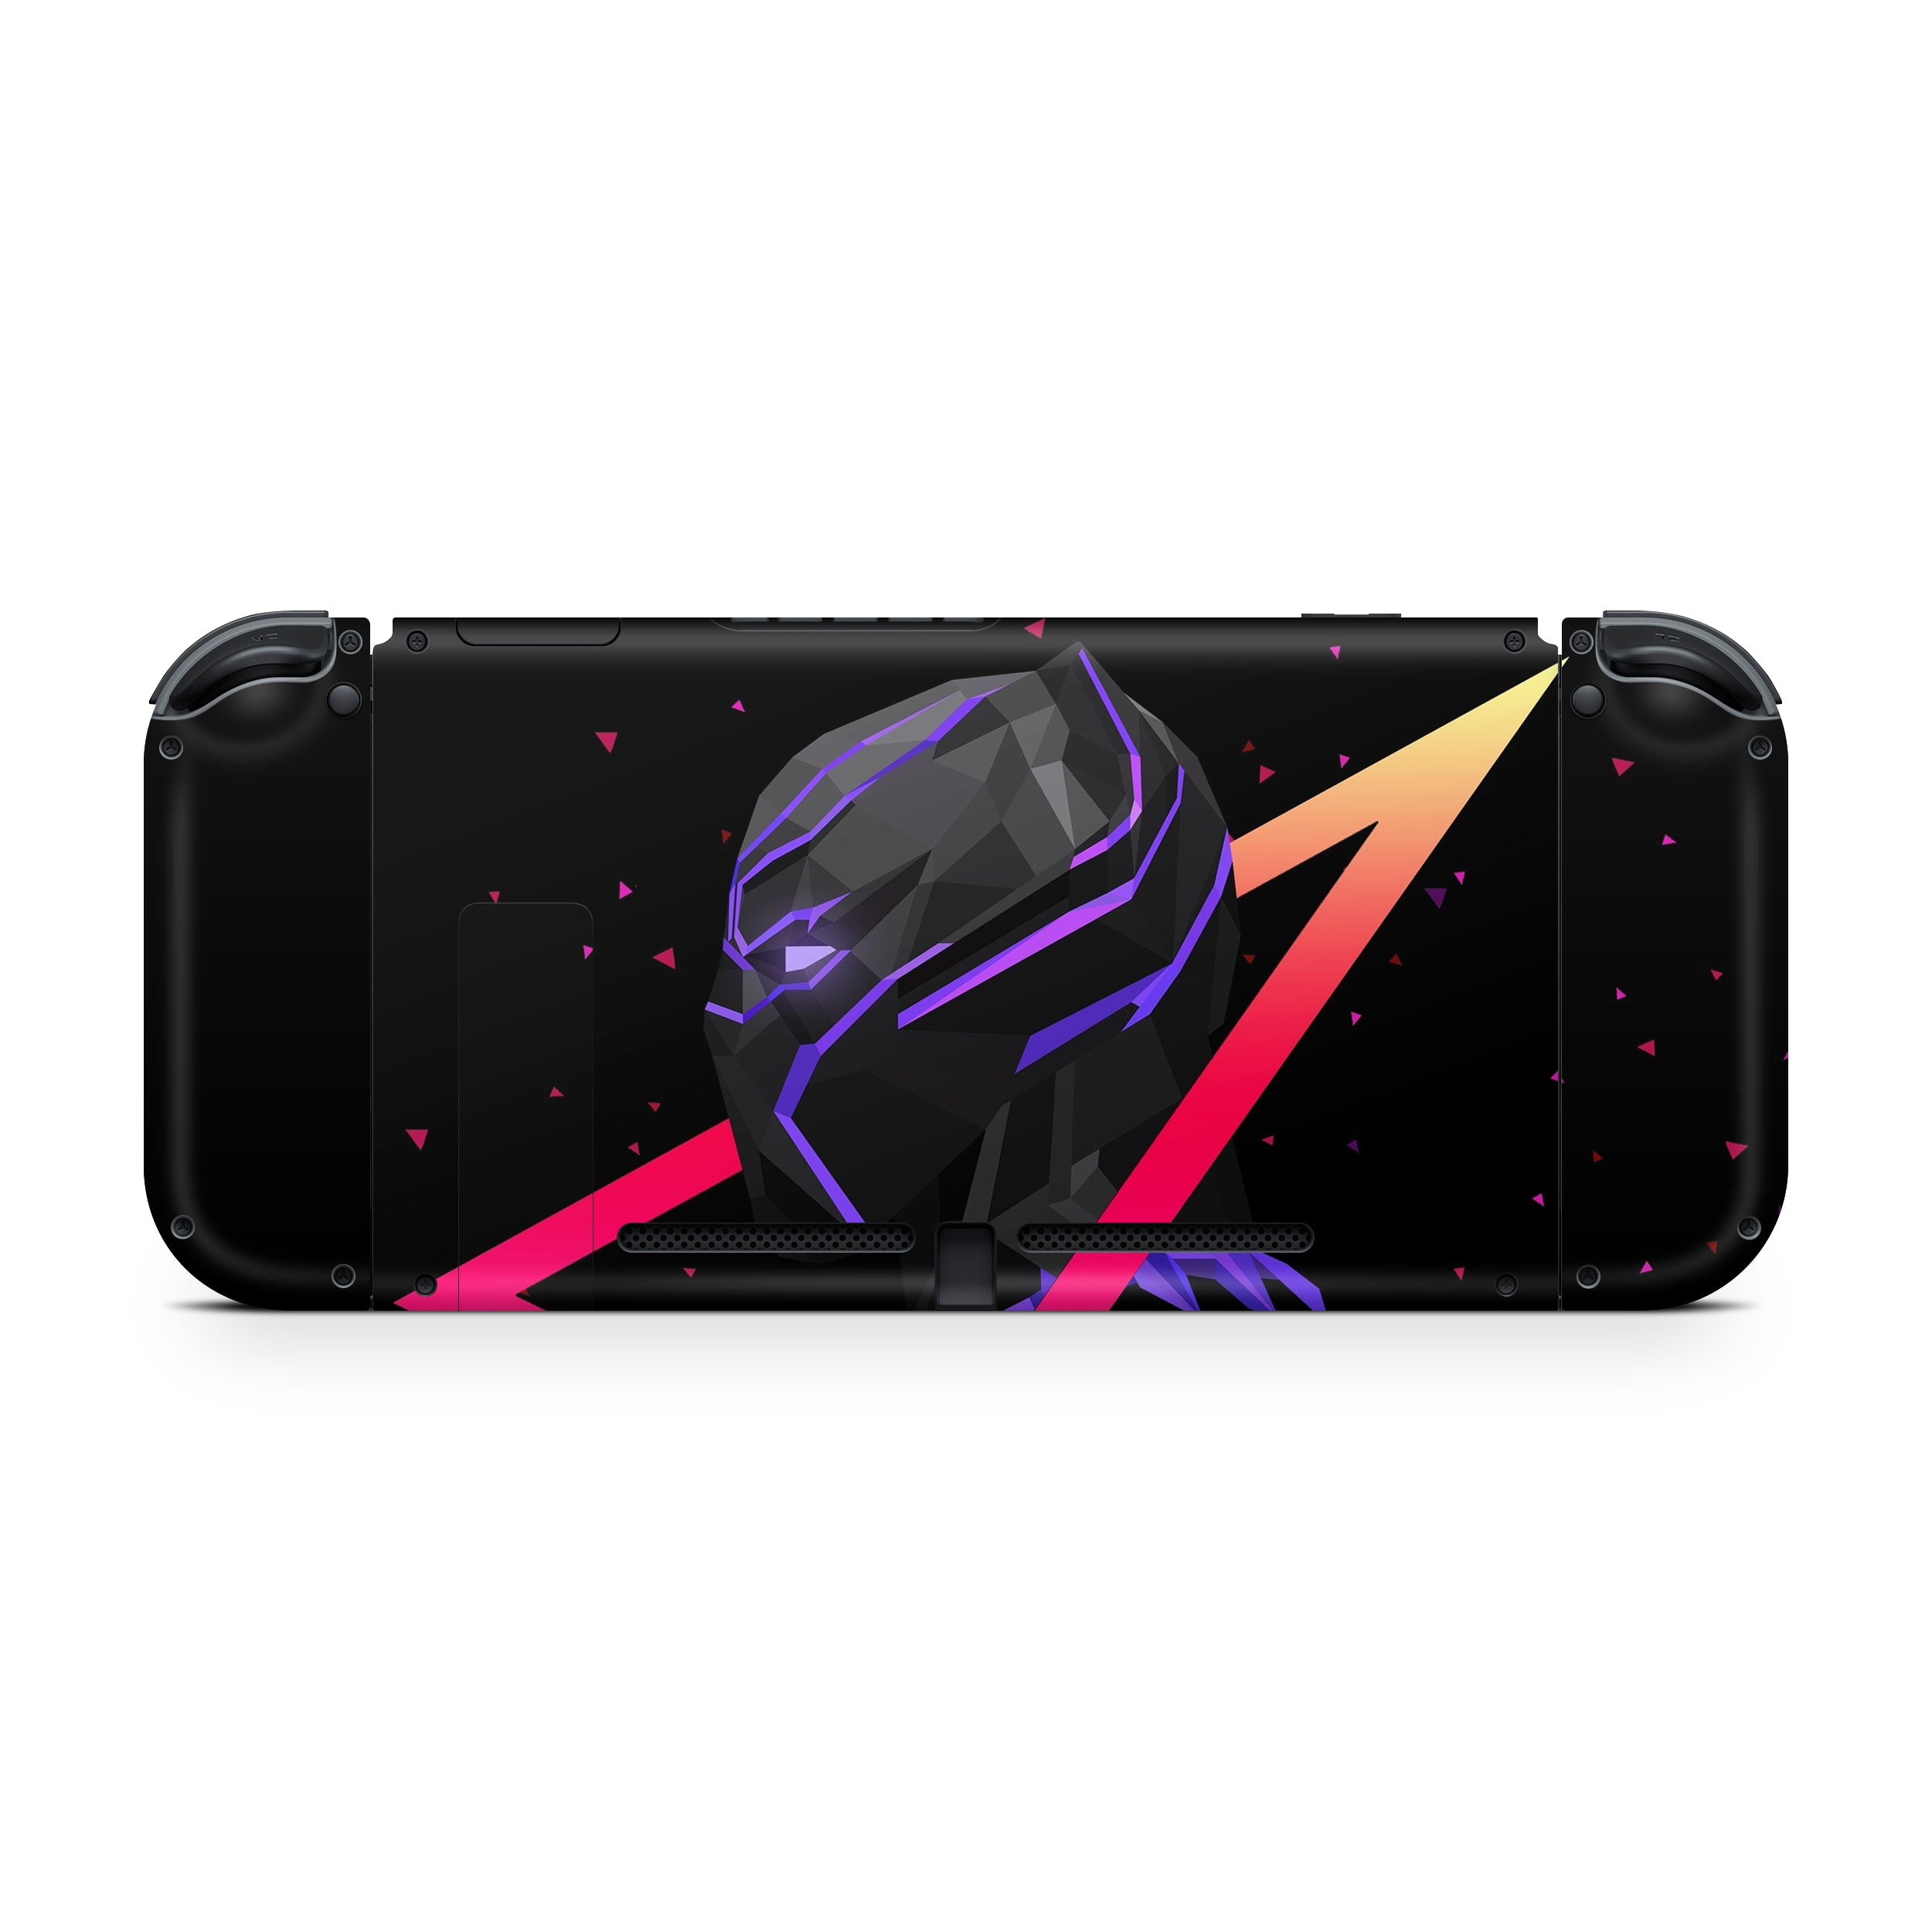 A video game skin featuring a Marvel Comics Black Panther design for the Nintendo Switch.